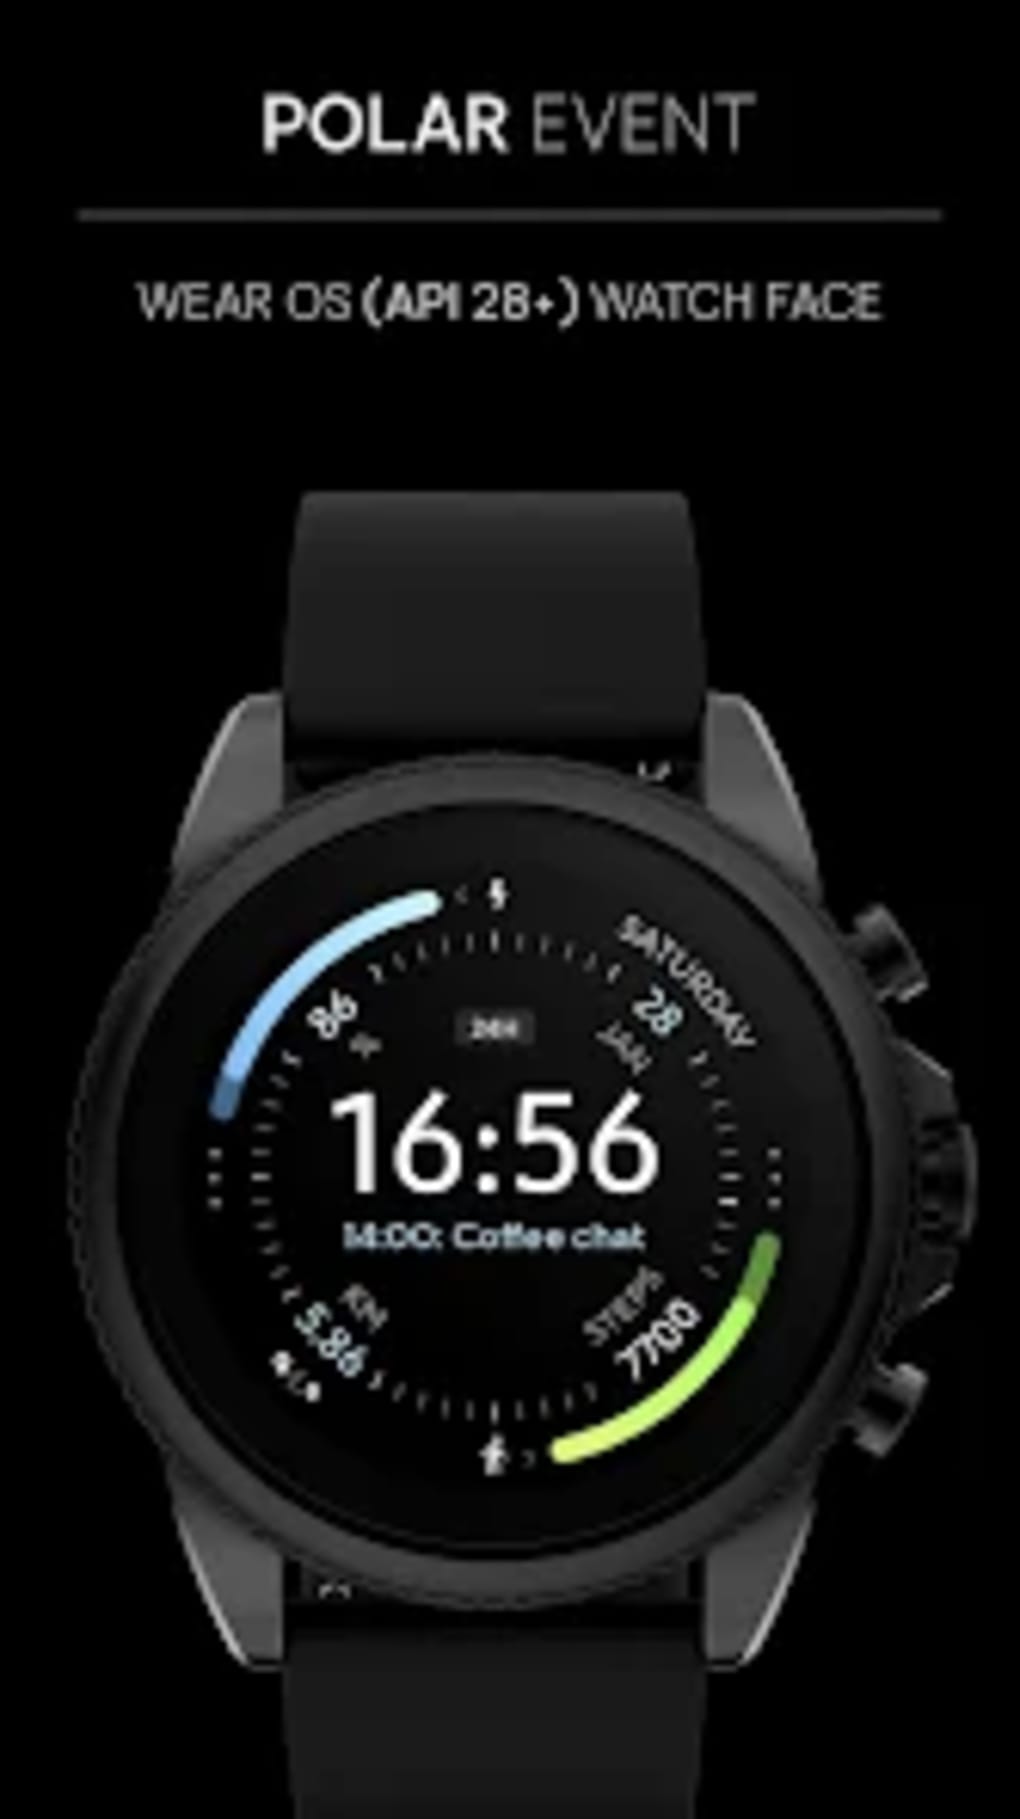 awf-polar-event-watch-face-for-android-download